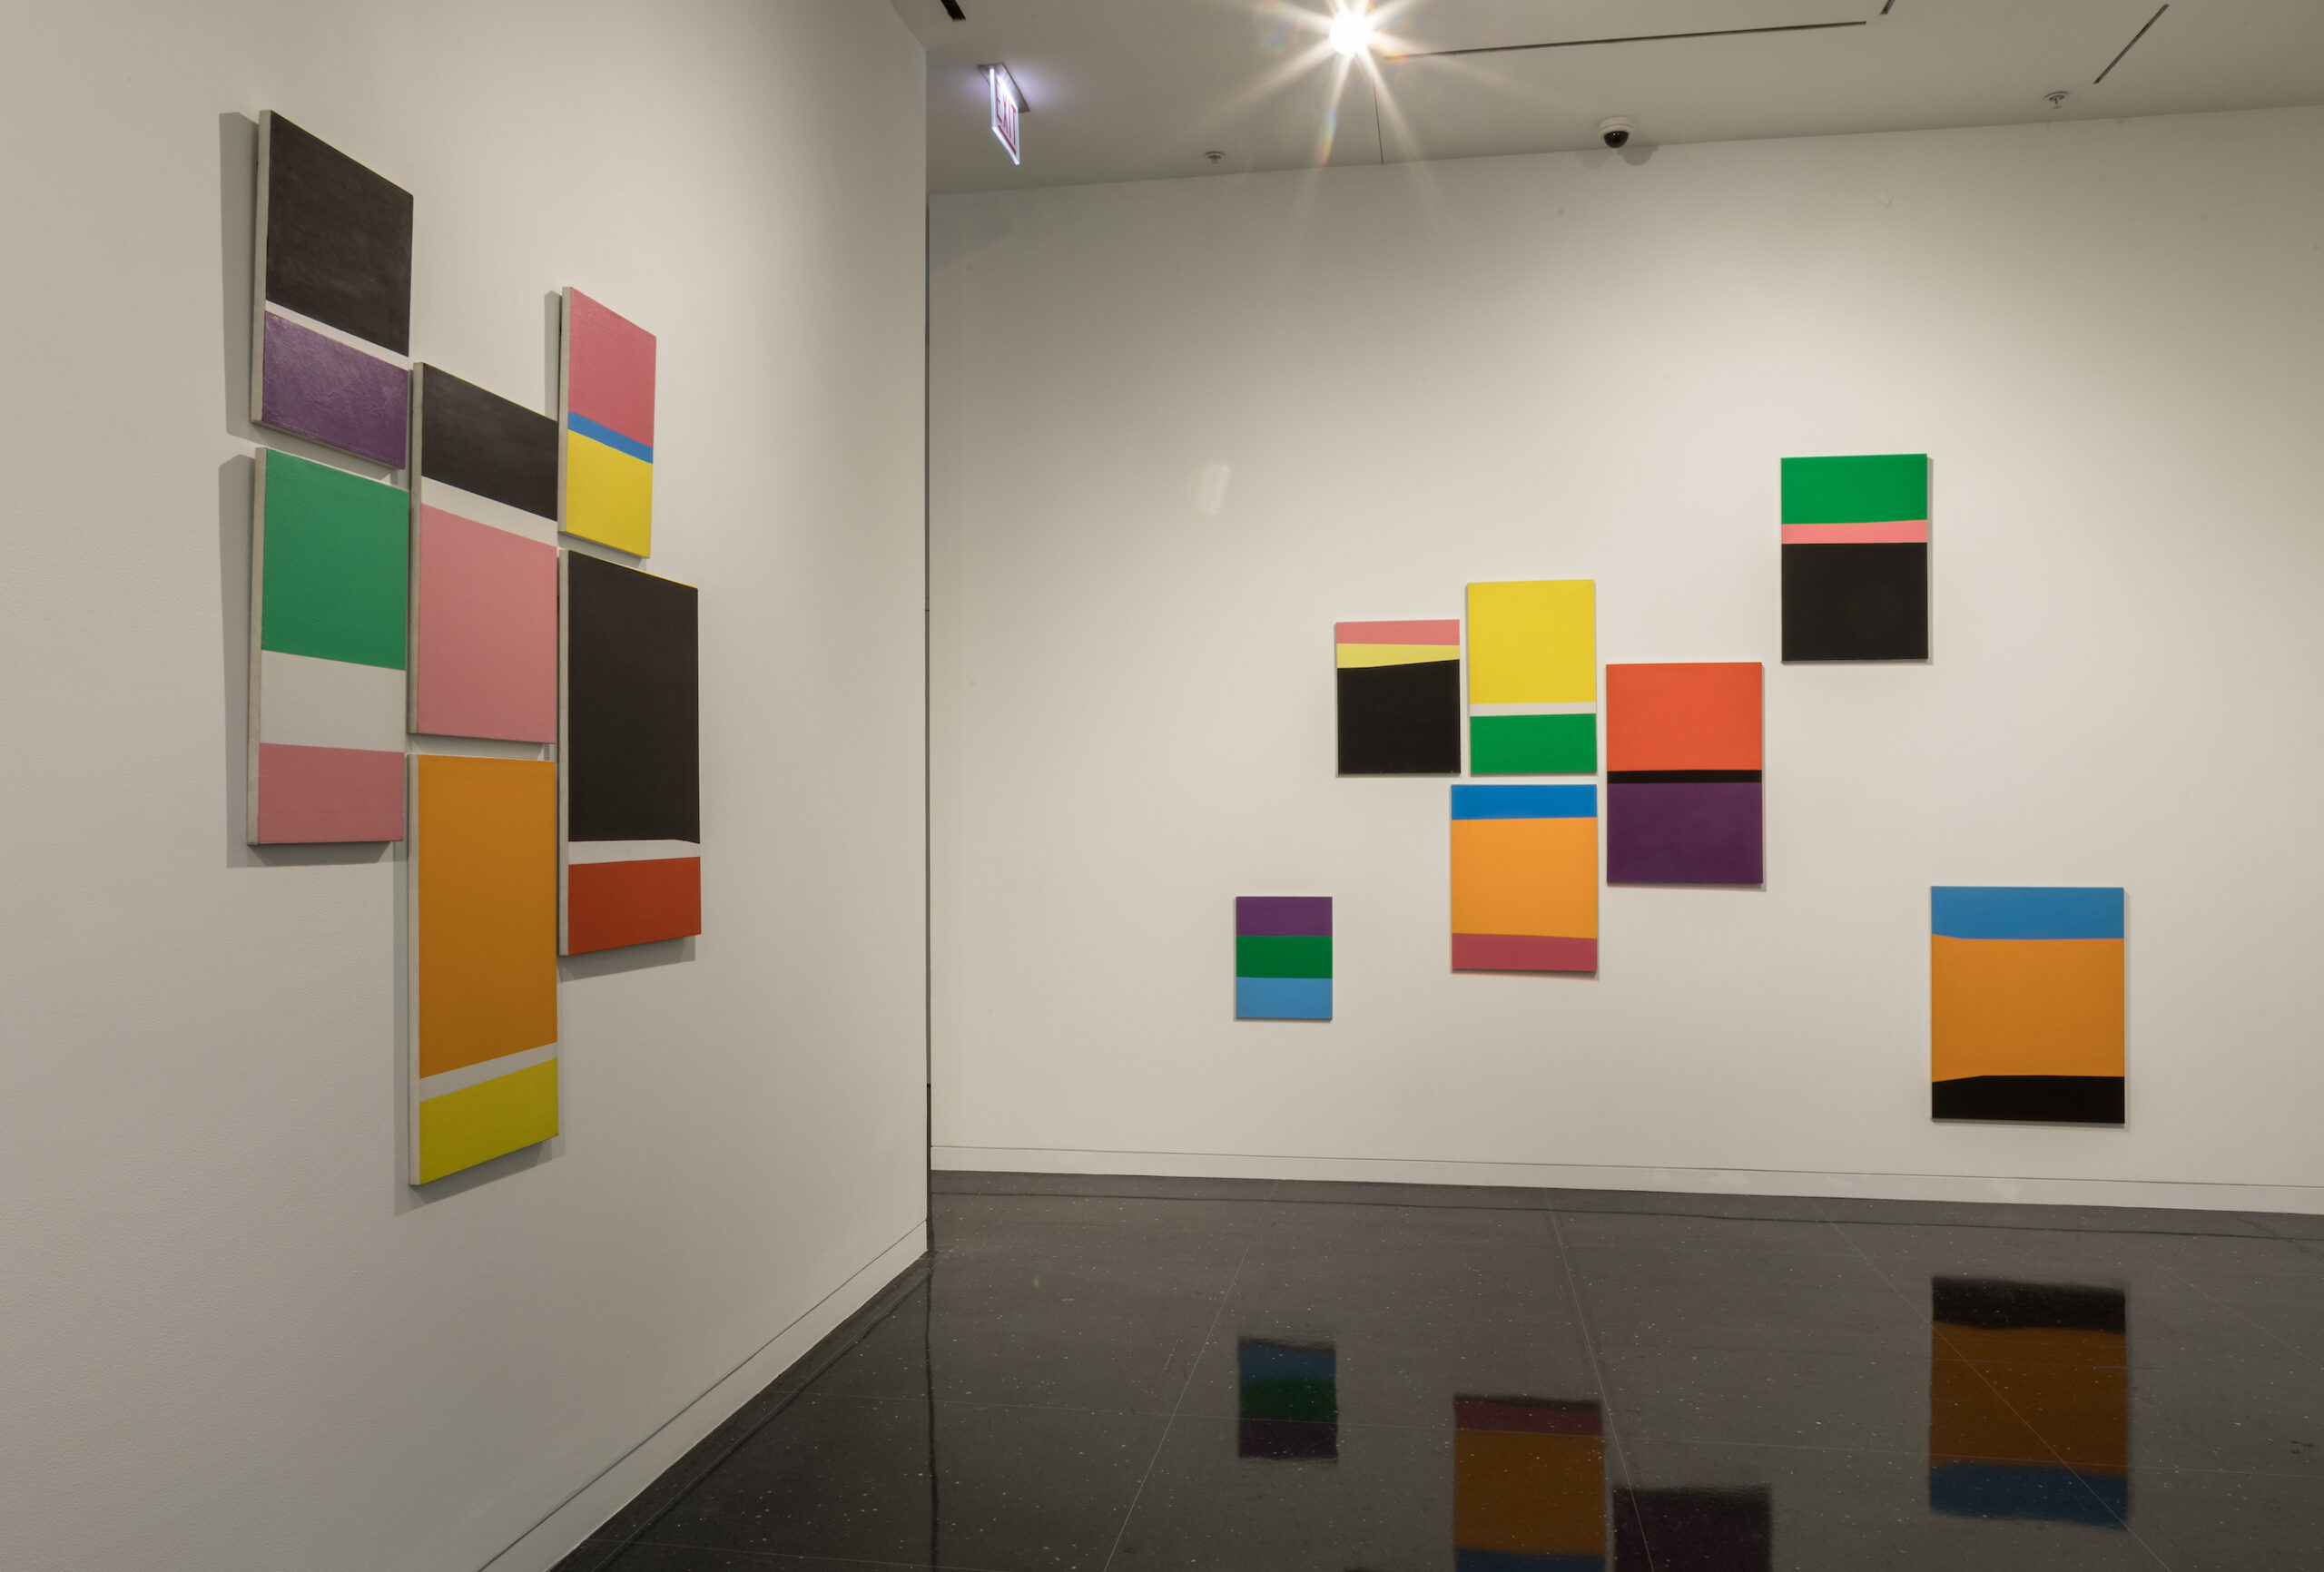 A series of variously sized colorblock paintings fill two walls.